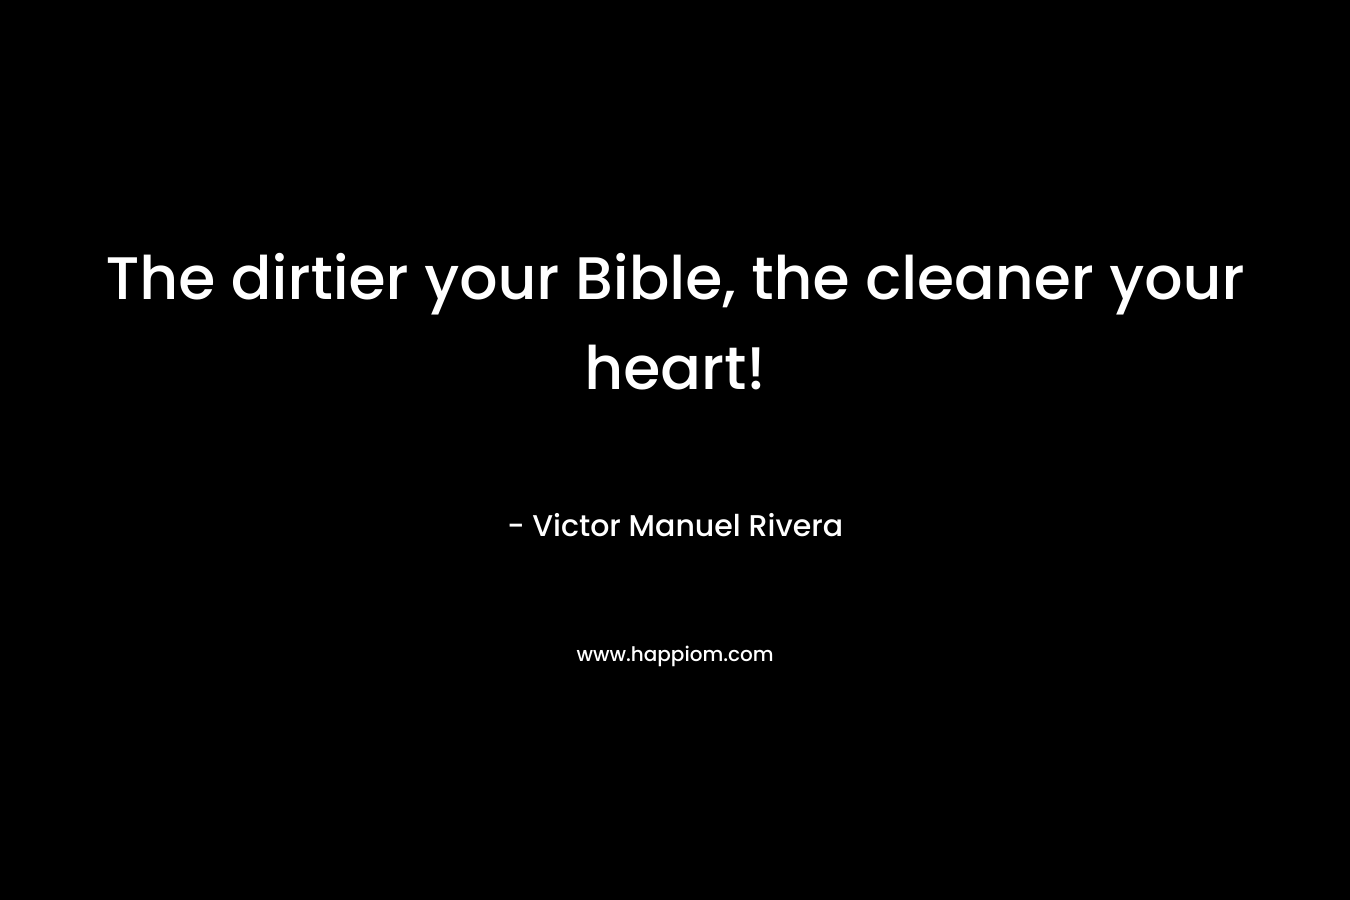 The dirtier your Bible, the cleaner your heart! – Victor Manuel Rivera